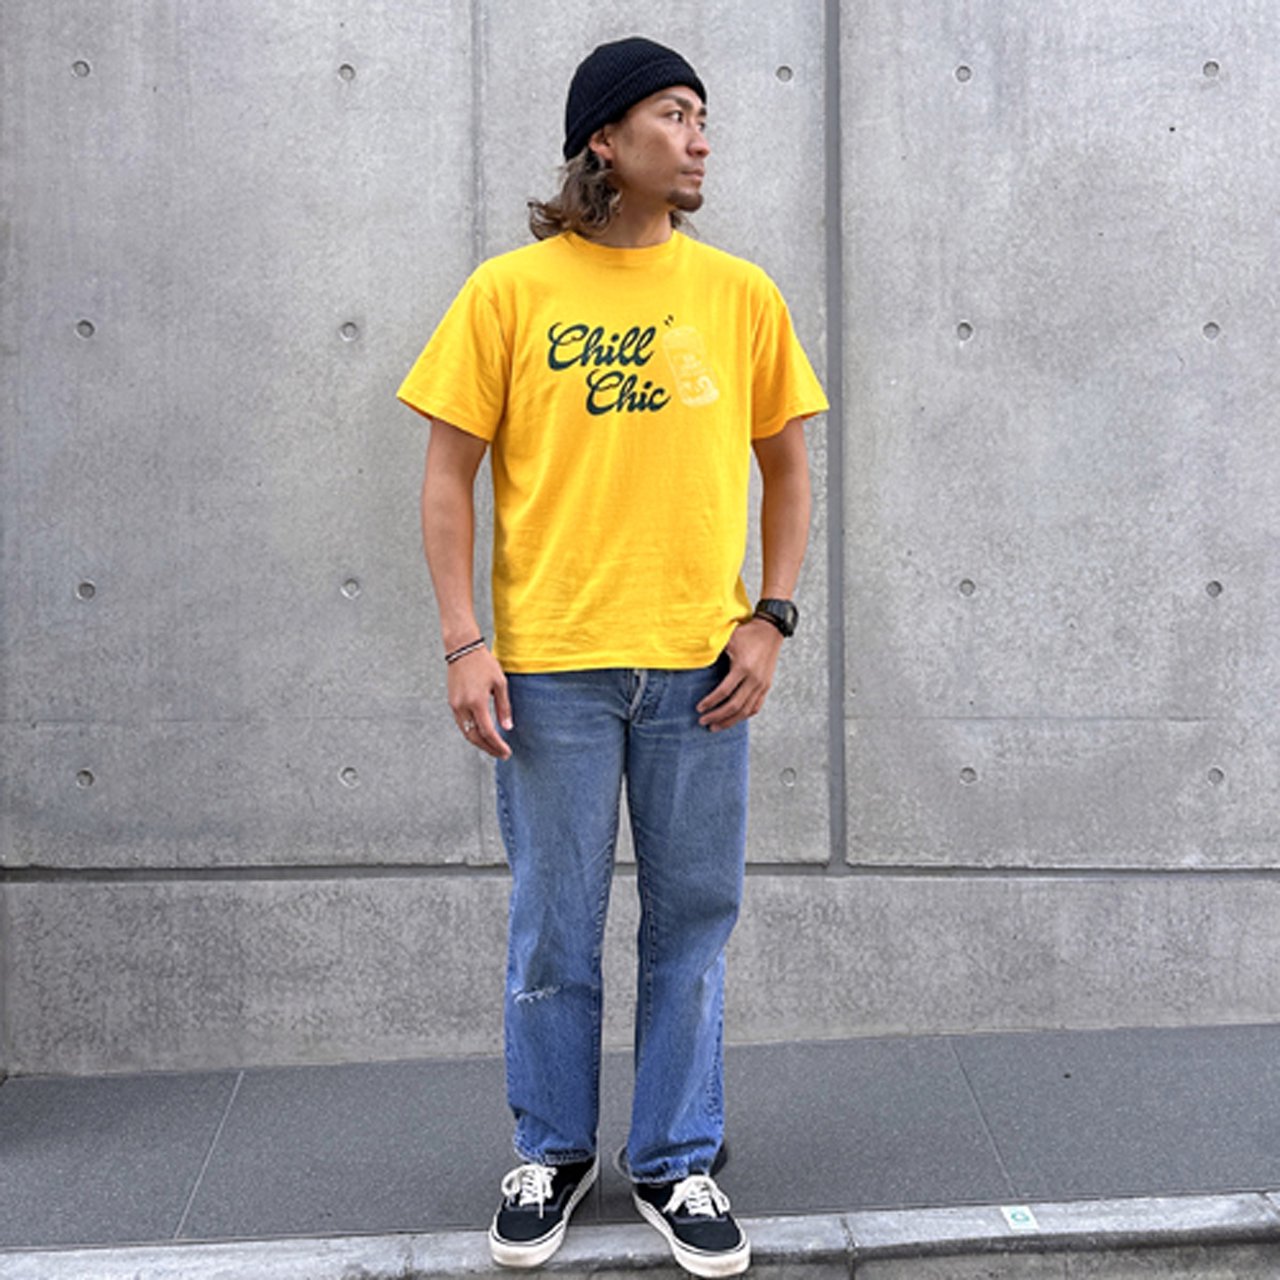 <img class='new_mark_img1' src='https://img.shop-pro.jp/img/new/icons5.gif' style='border:none;display:inline;margin:0px;padding:0px;width:auto;' />STANDARD CALIFORNIA ( ե˥)Chill Chic Tee Yellow